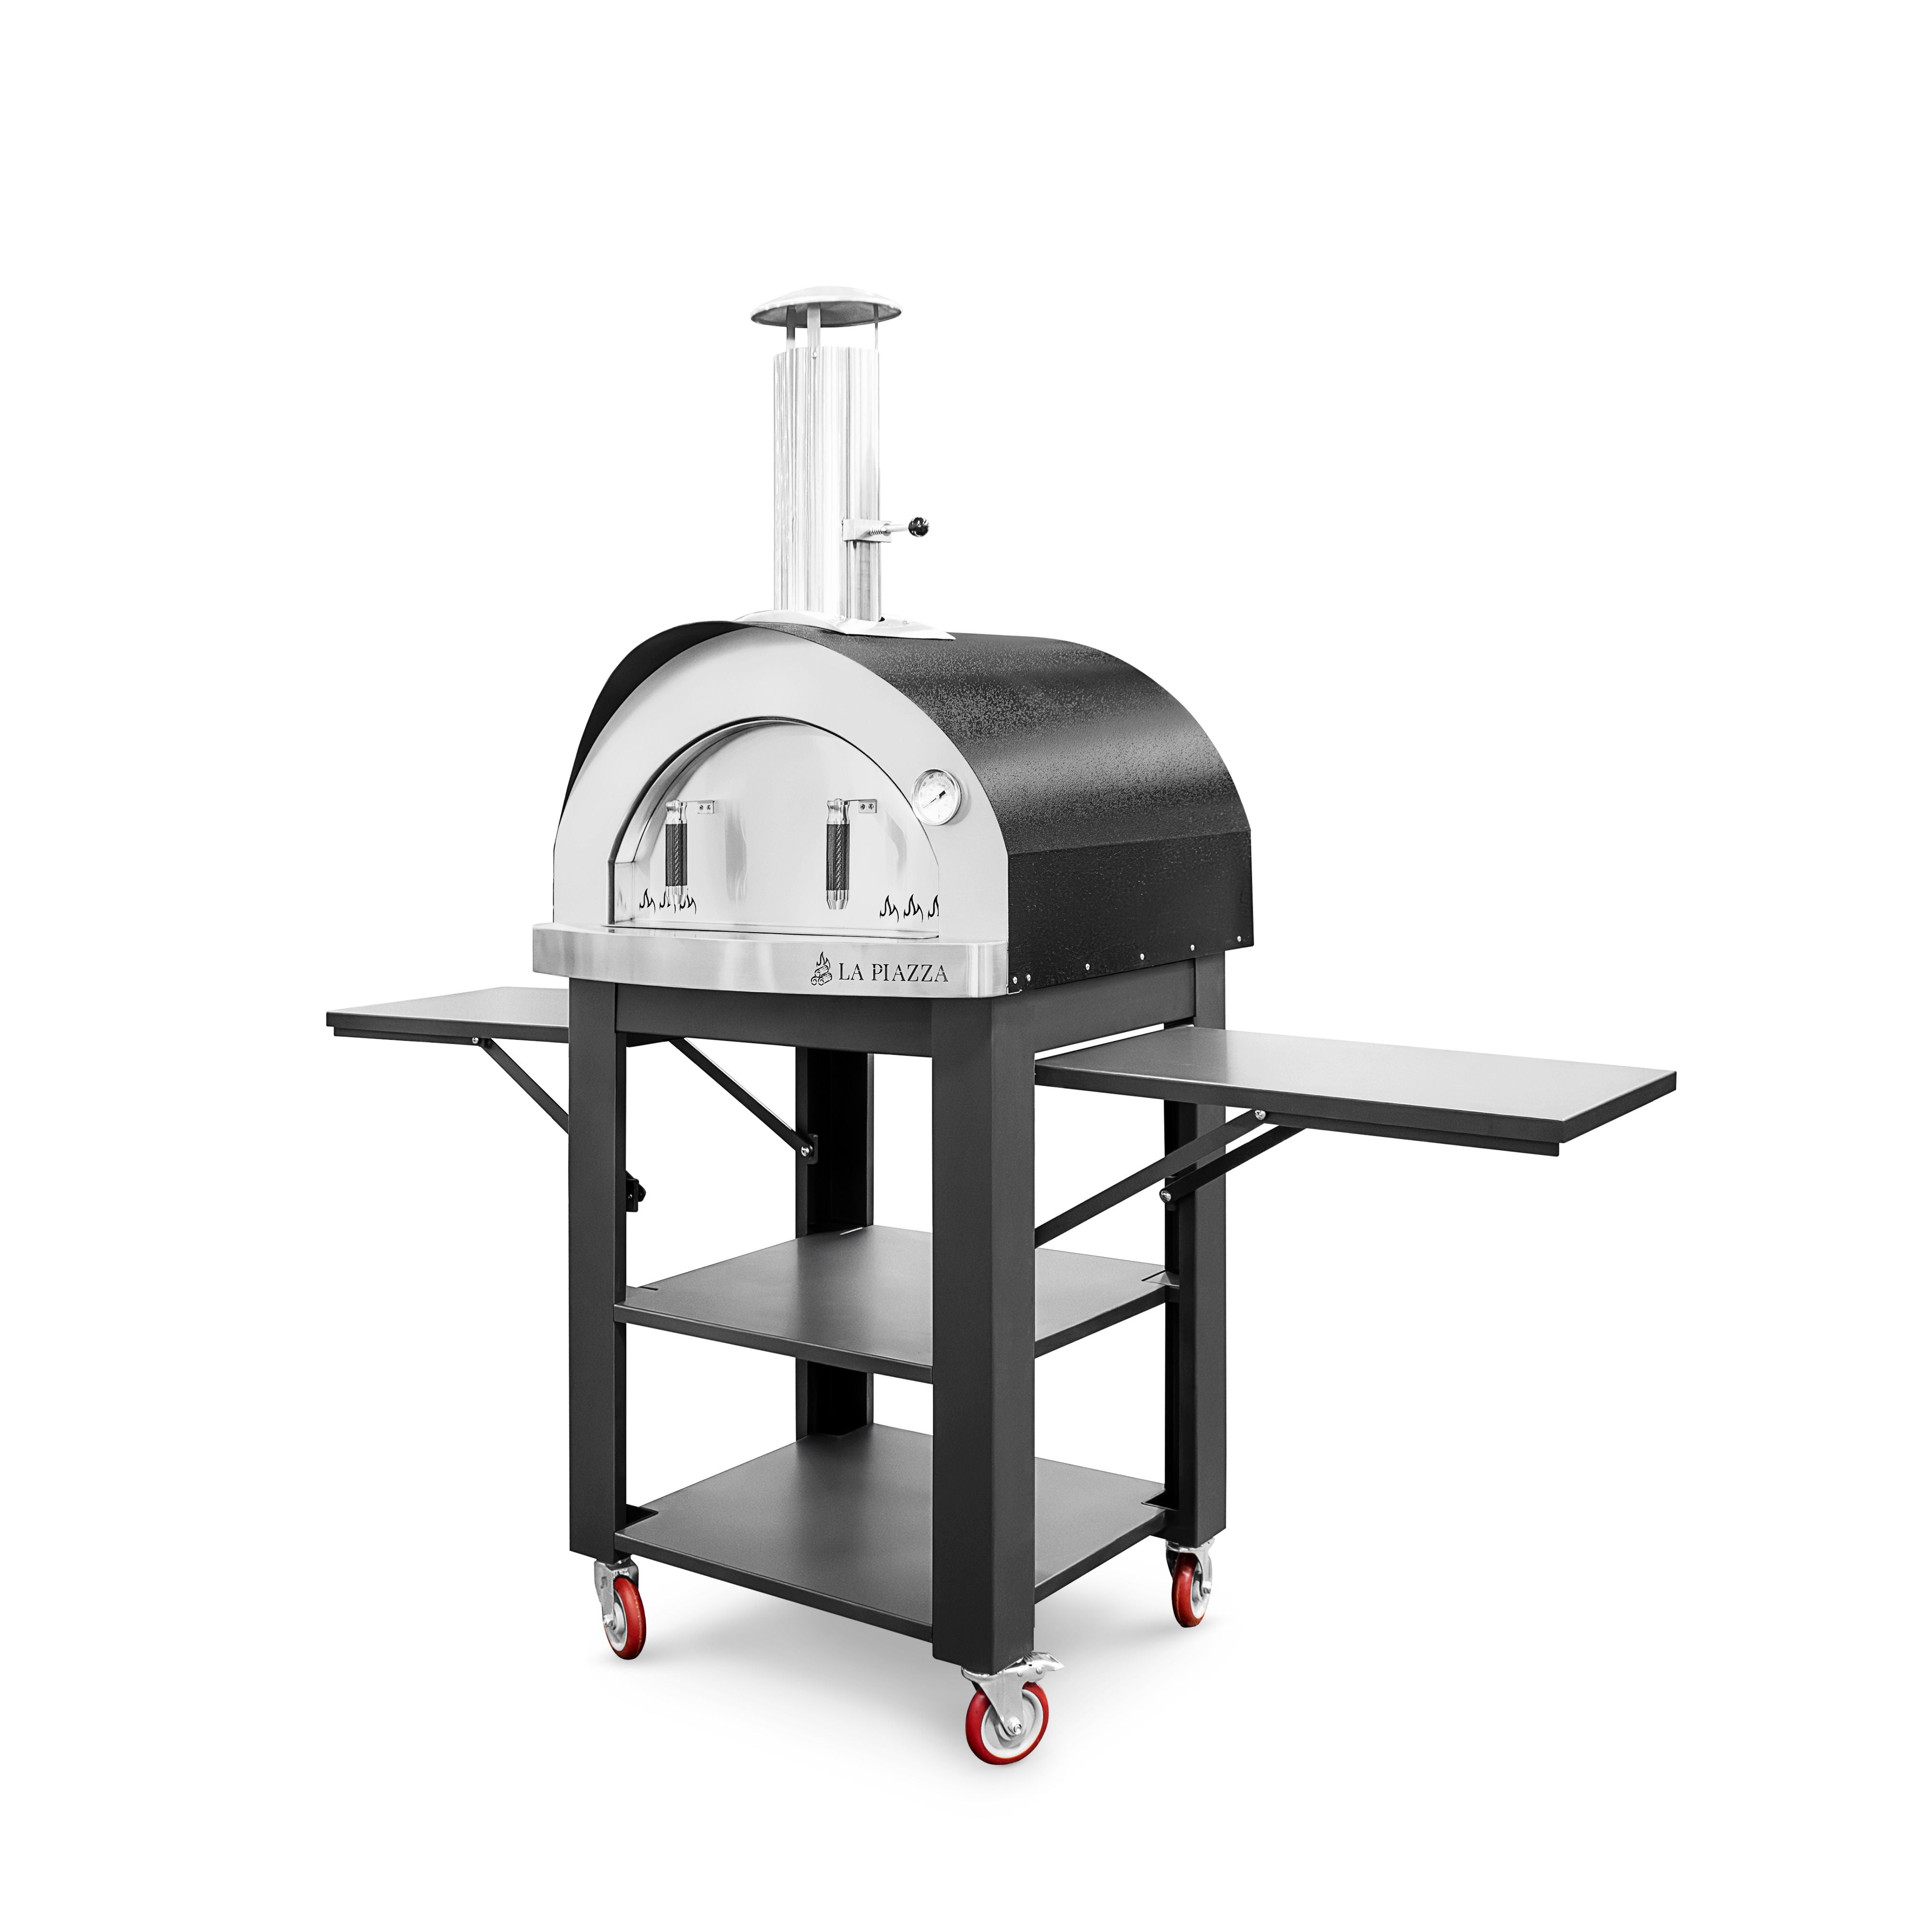 Piccolo Wood Oven with Stand - Black